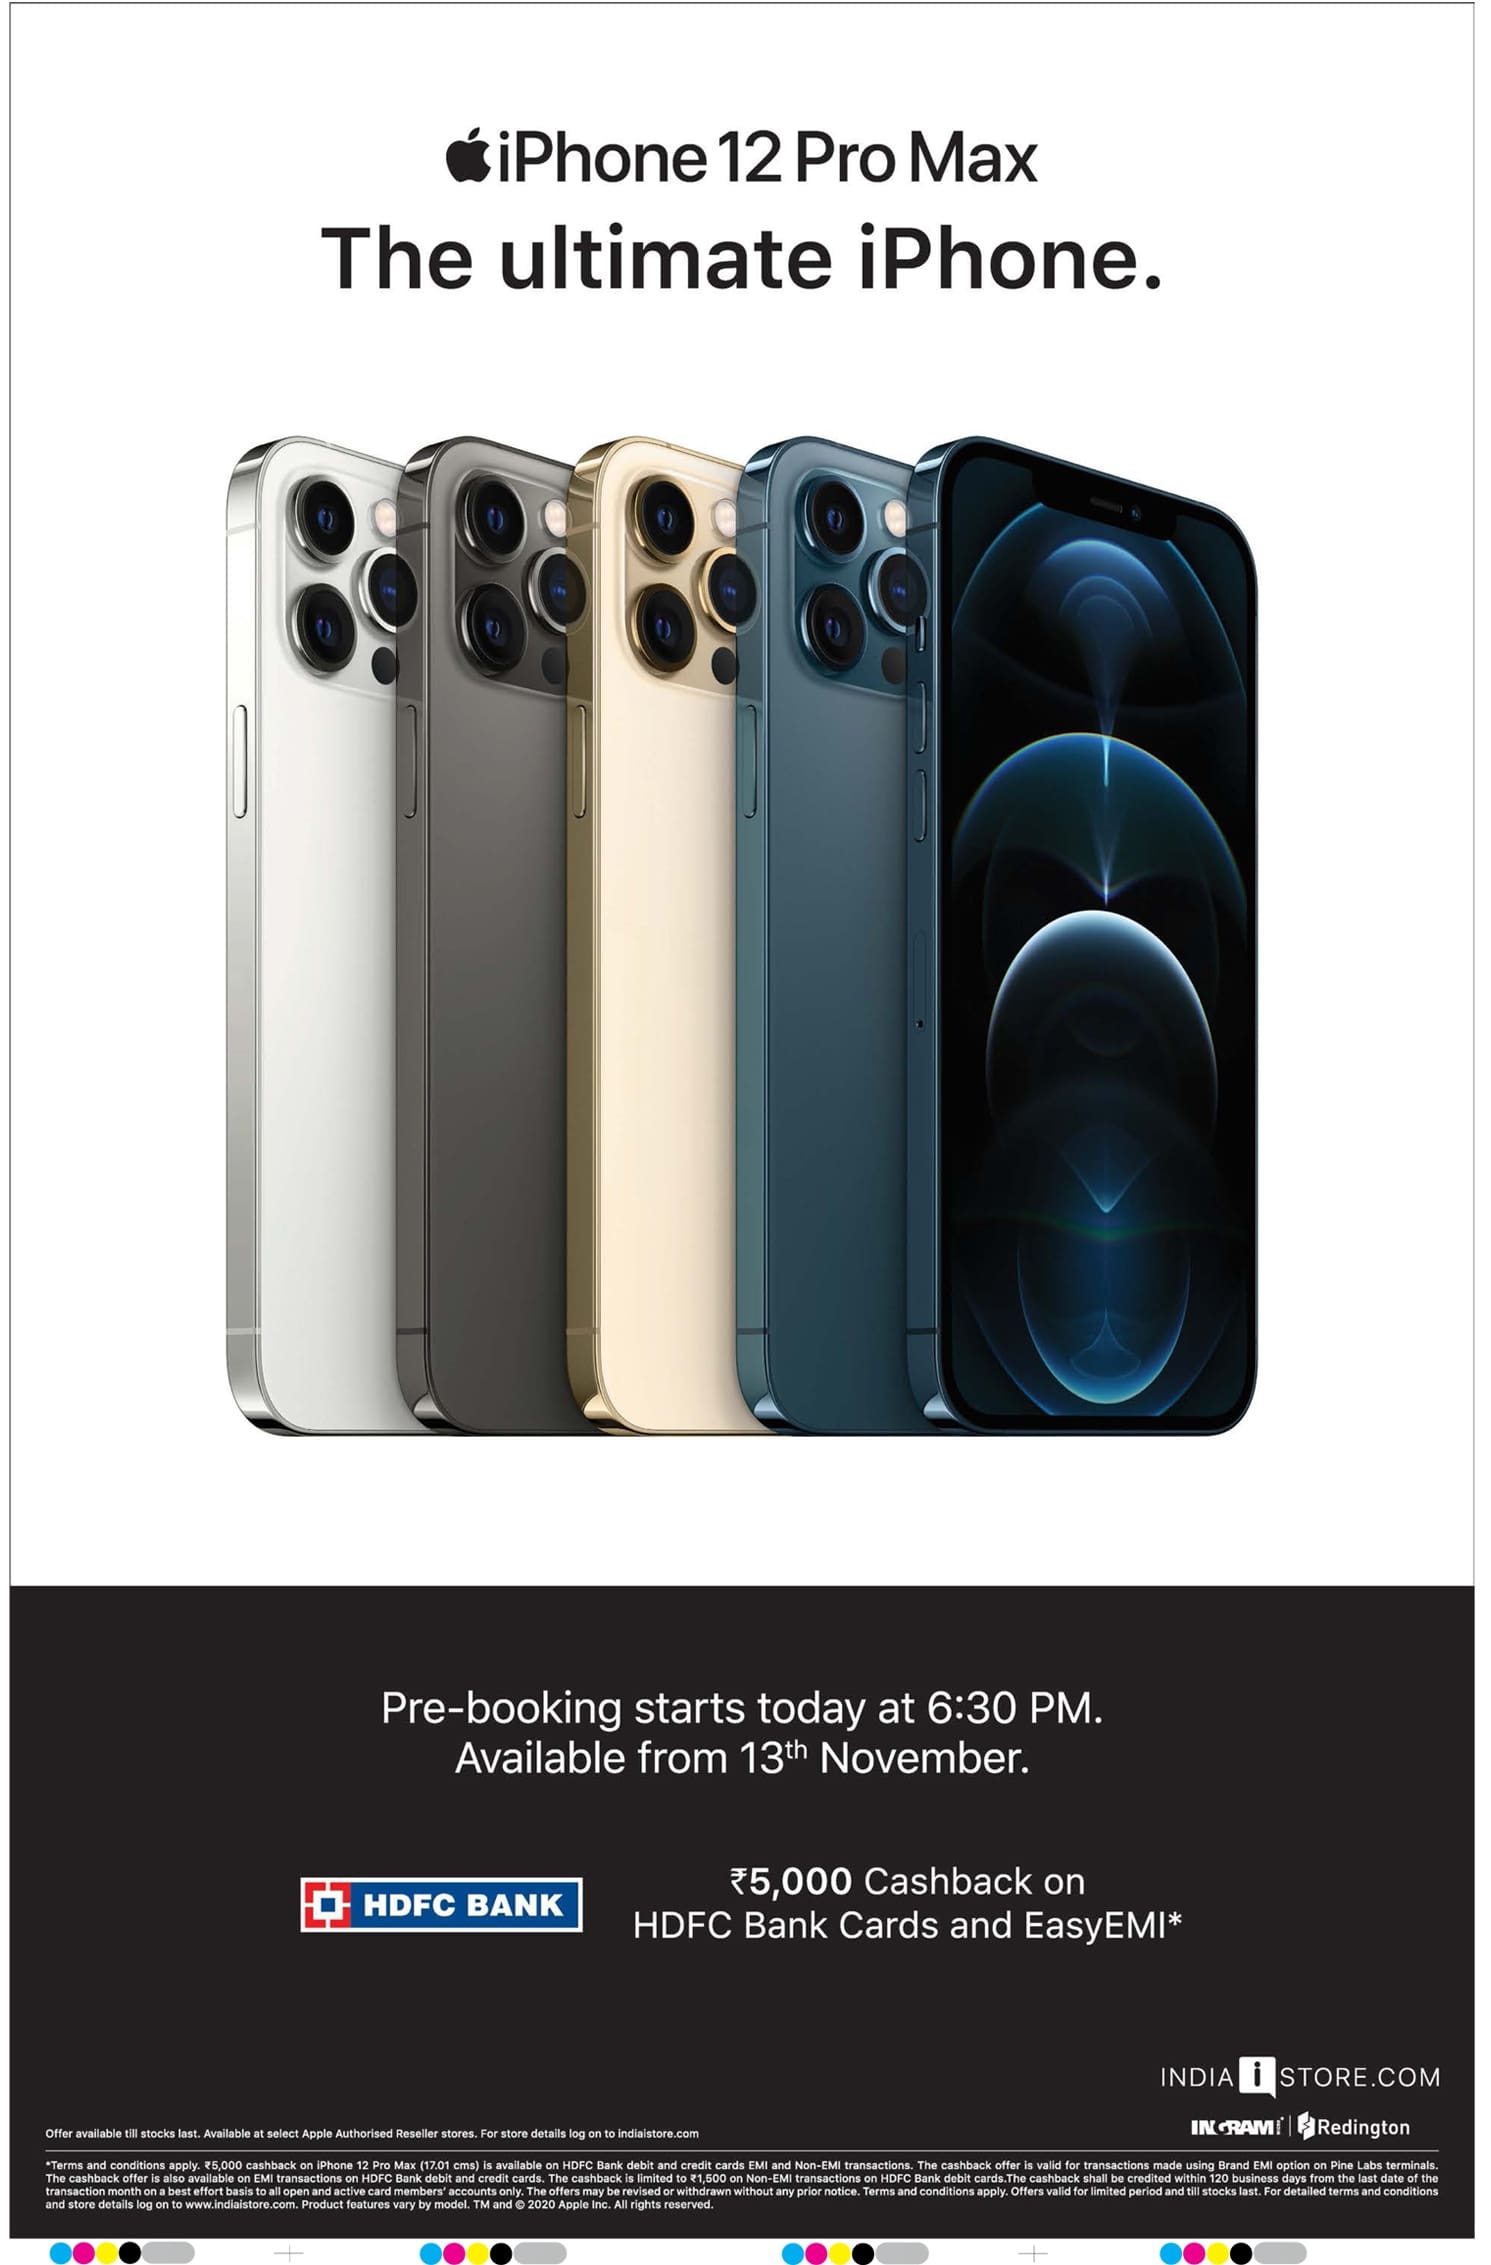 iphone-12-pro-max-the-ultimate-iphone-pre-booking-starts-today-ad-deccan-chronicle-hyderabad-6-11-2020